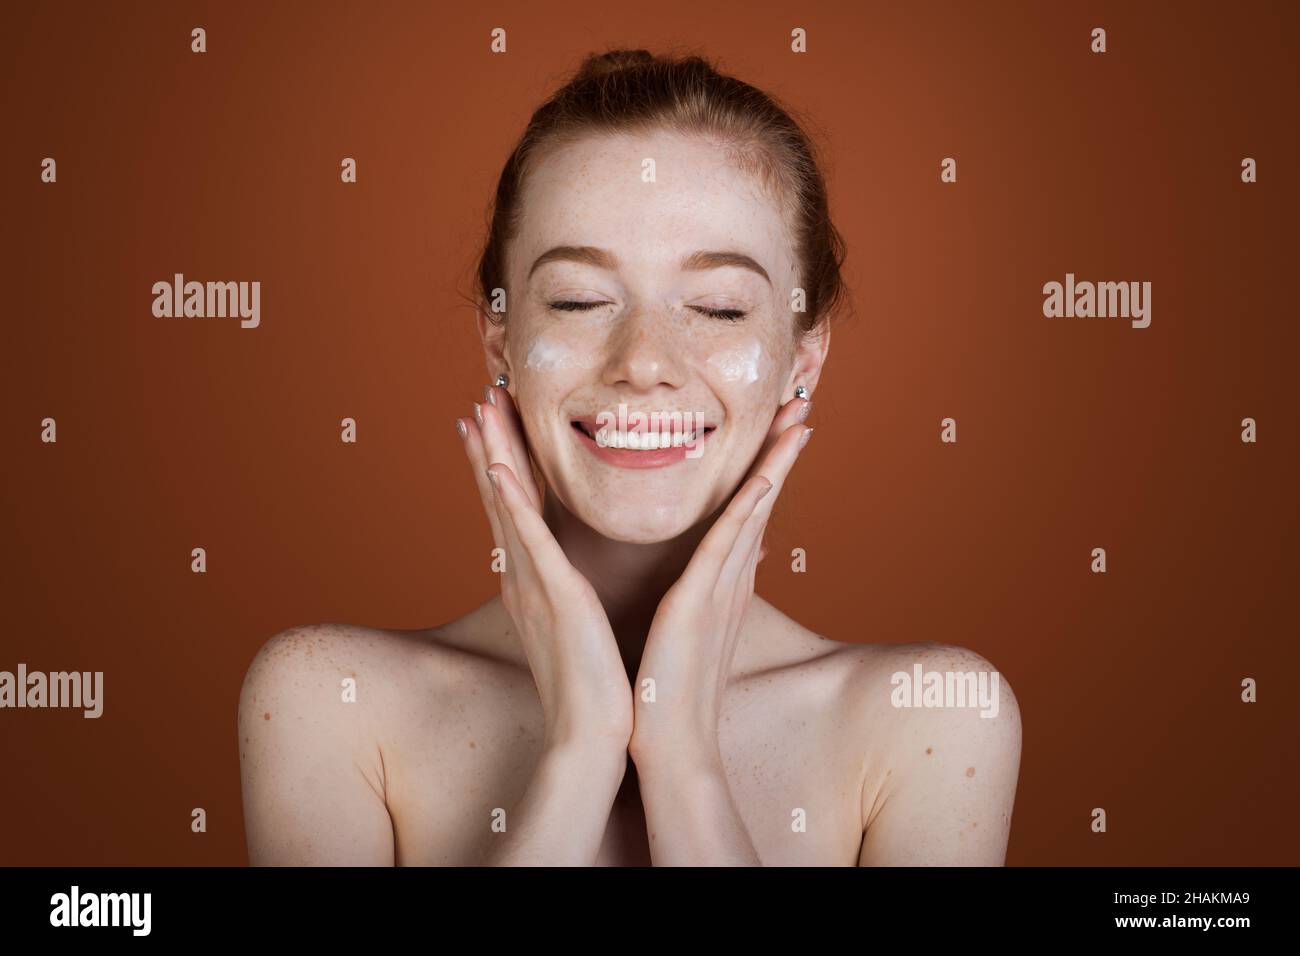 Caucasian freckled woman applying cosmetic cream on her face isolated over brown background. Smiling redhead woman. Stock Photo